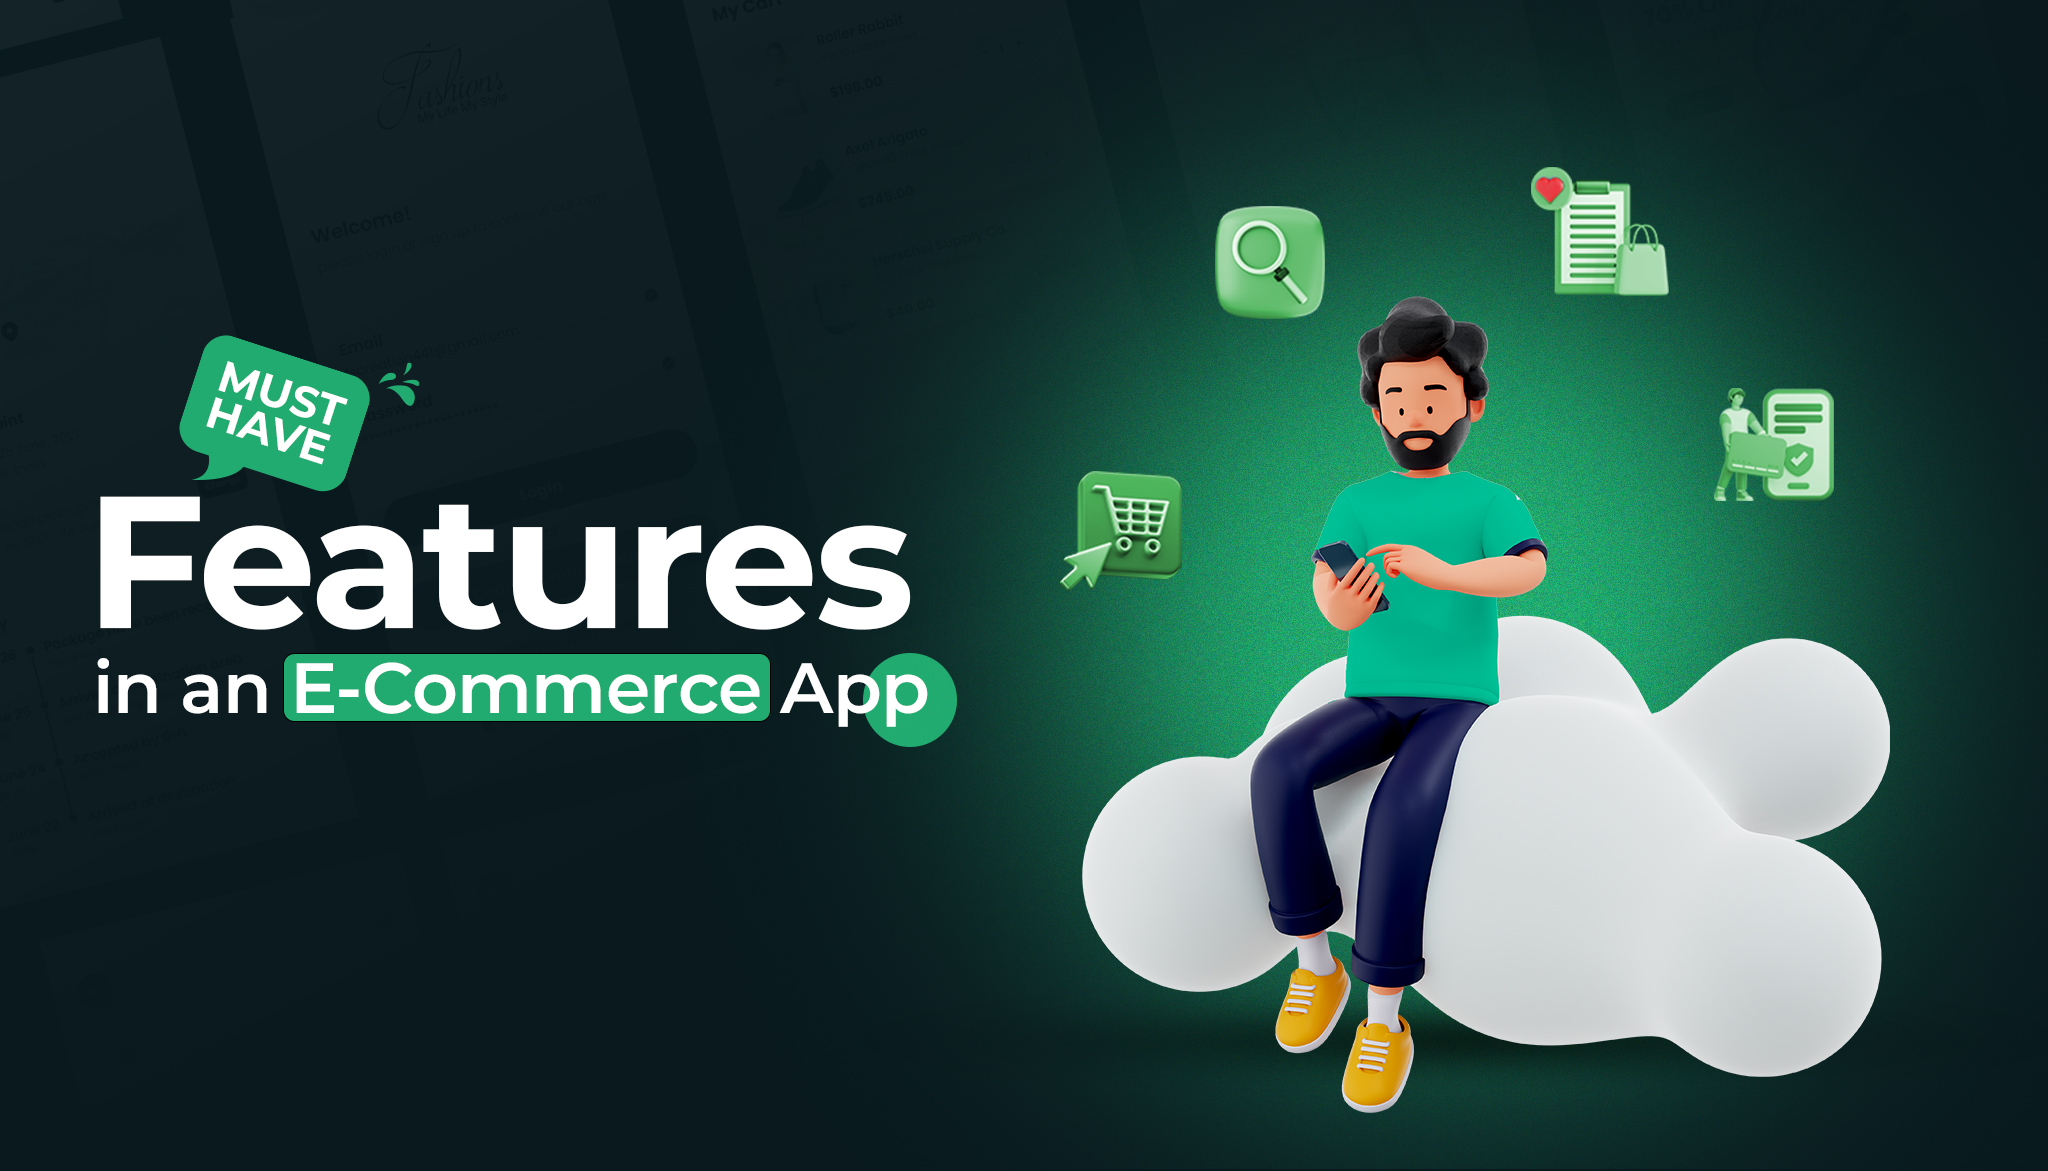 Must-have features in an E-Commerce App